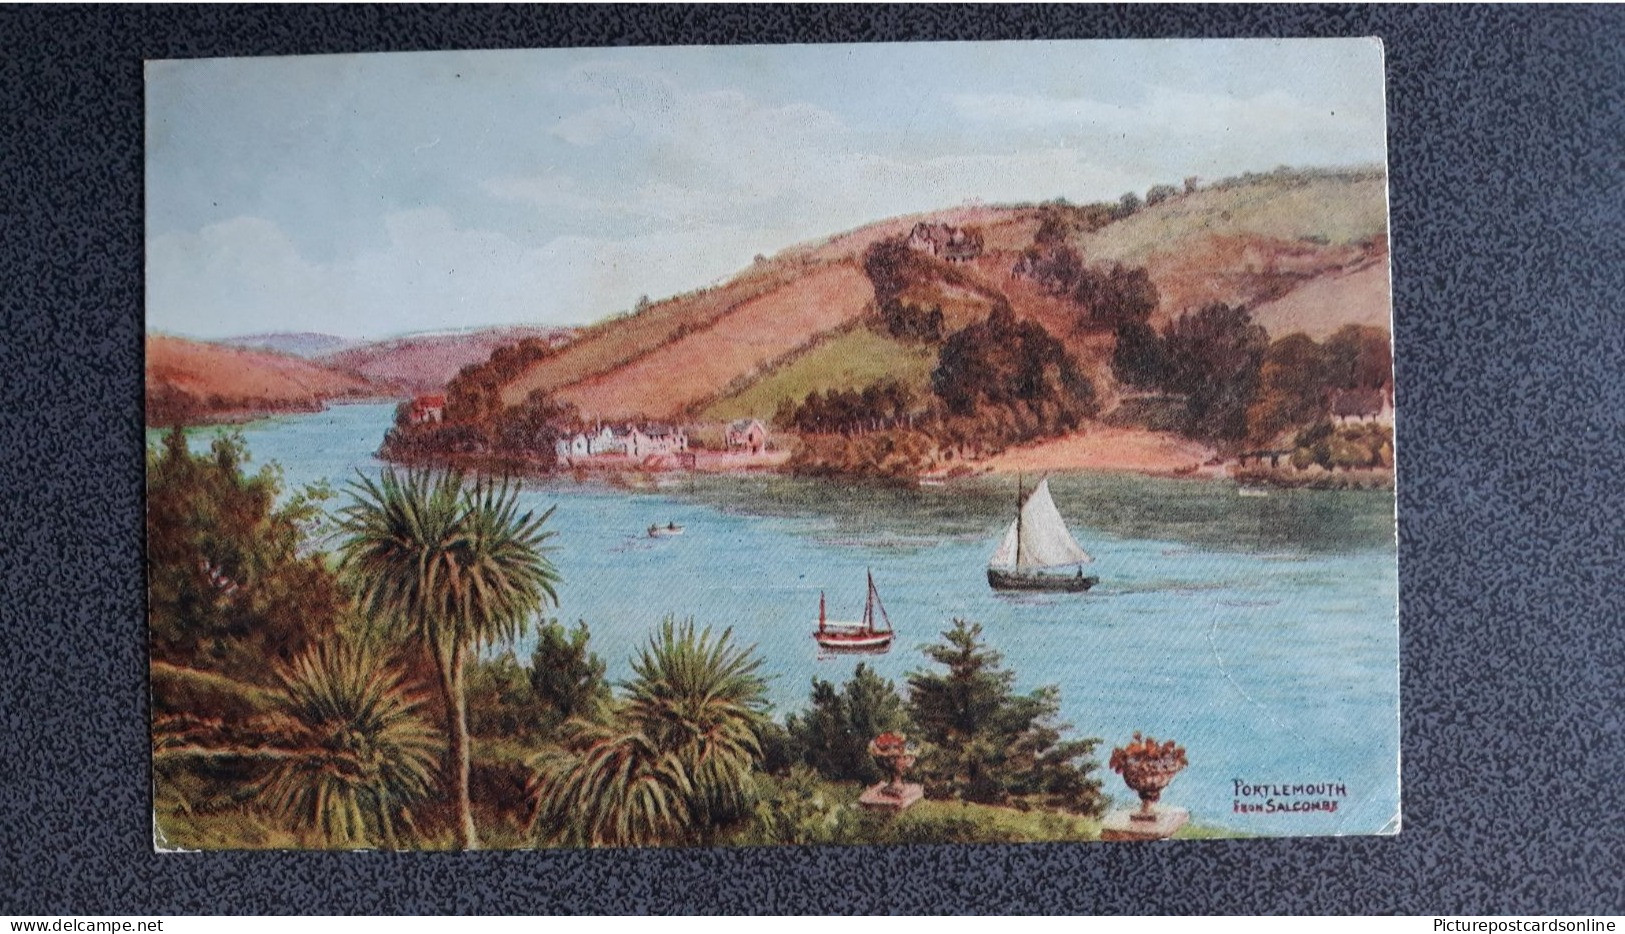 PORTLEMOUTH FROM SALCOMBE OLD COLOUR ART POSTCARD ARTIST SIGNED A. R. QUINTON ARQ SALMON NO 2398 - Quinton, AR